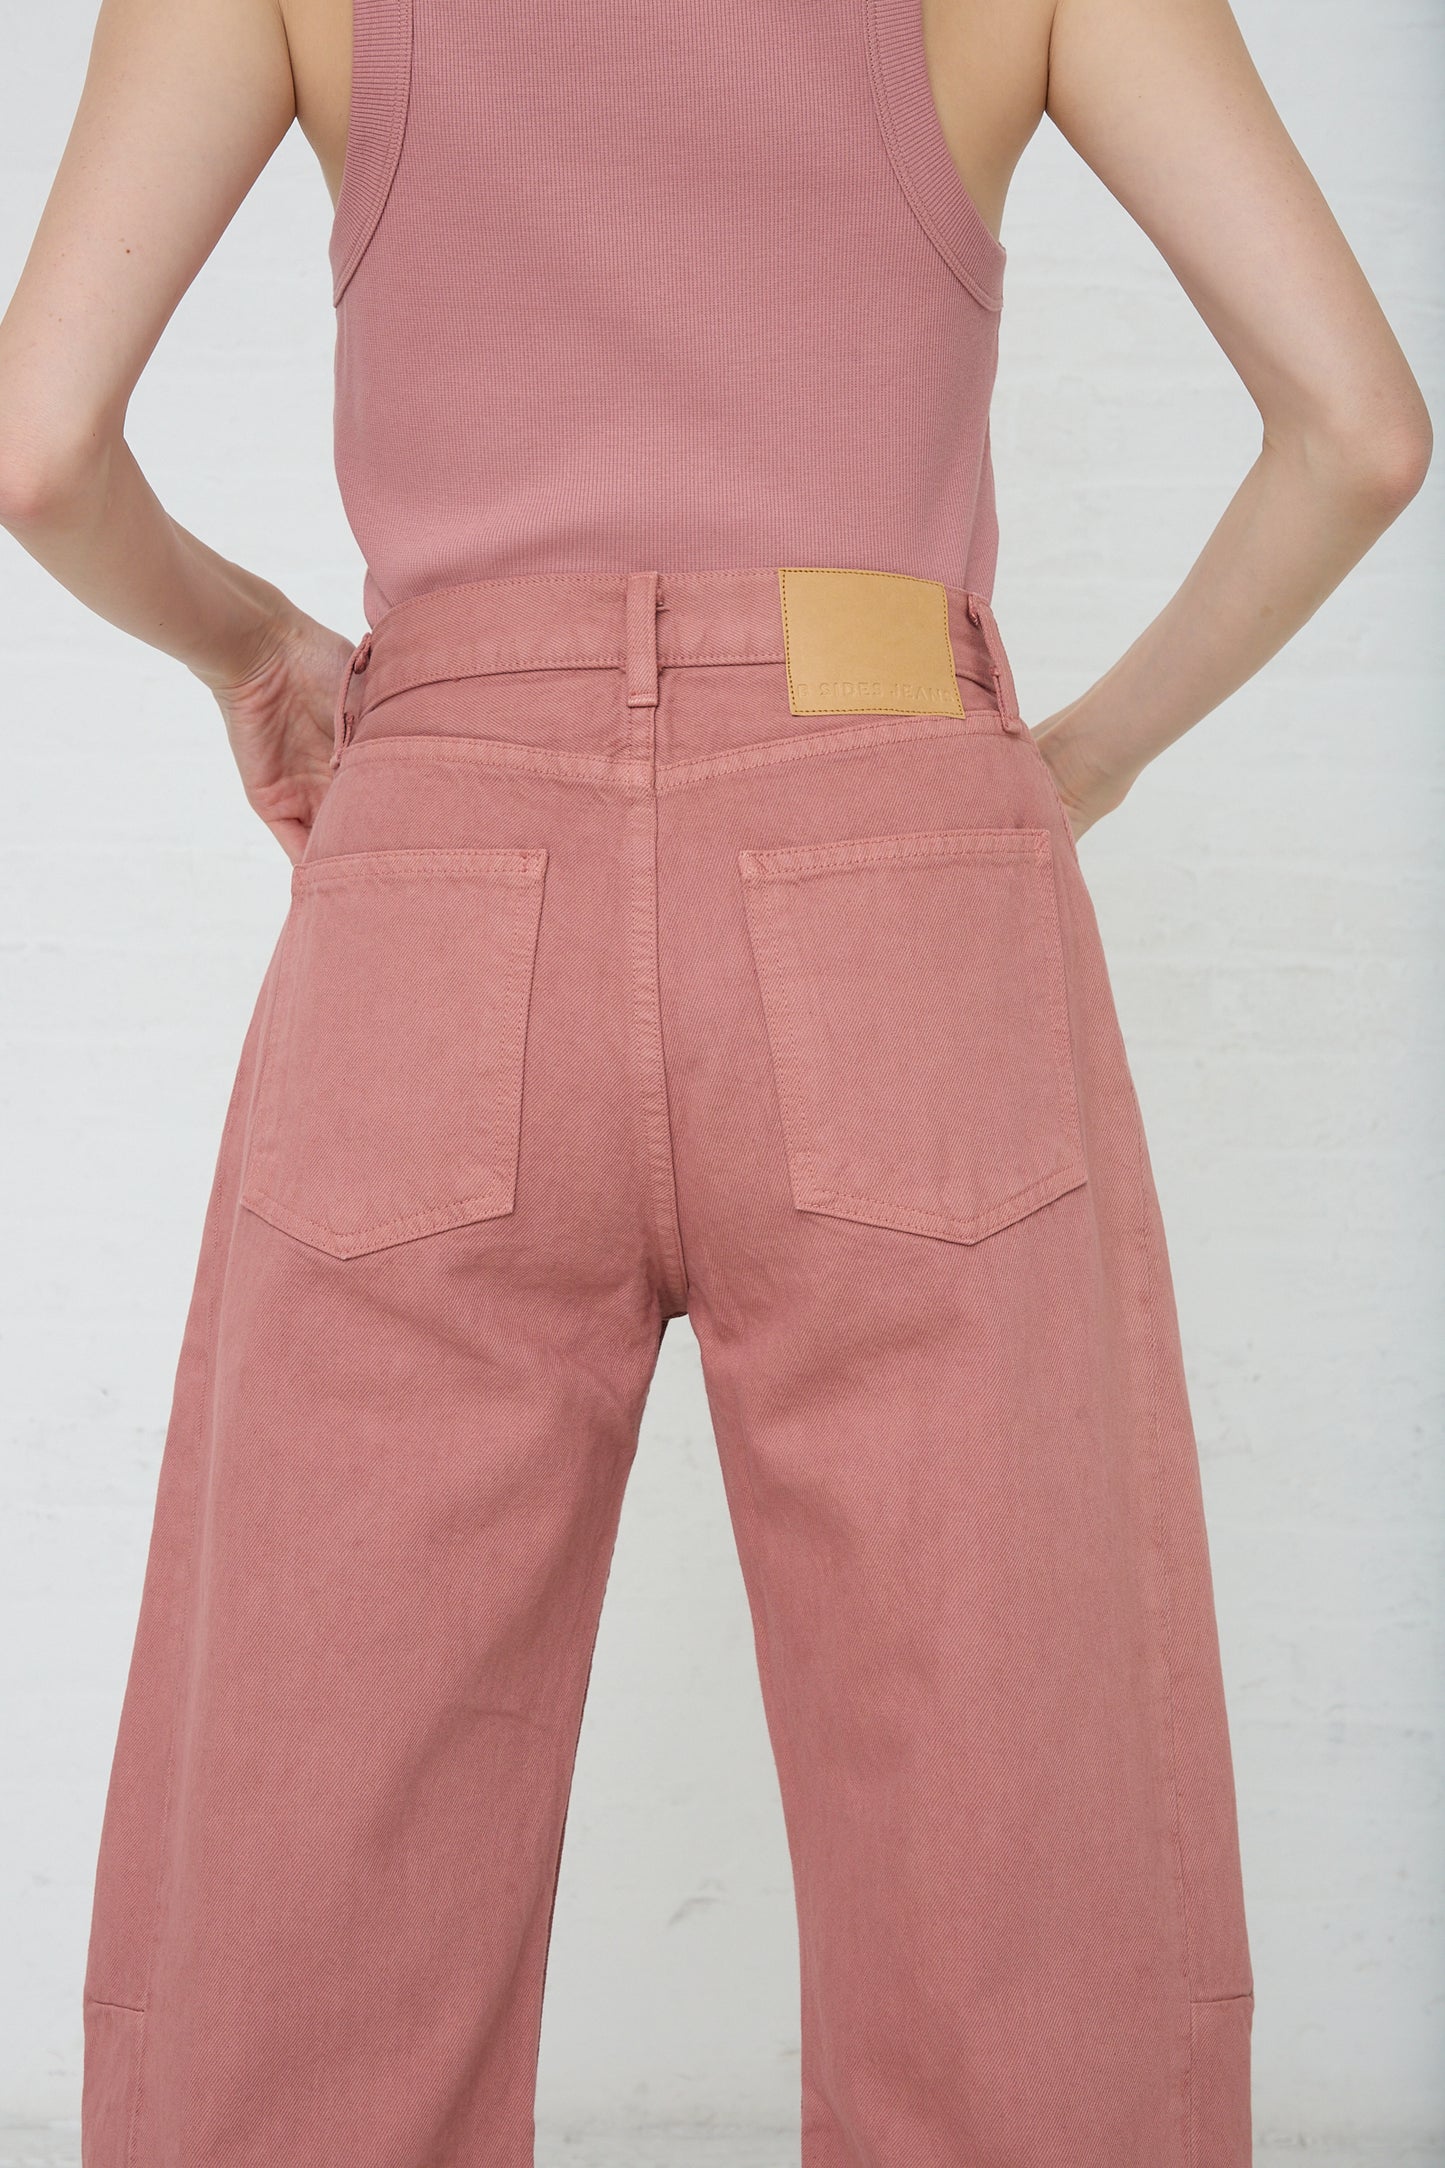 A person standing with hands on their hips wearing pink, vintage high-waisted Slim Lasso in Zinnia Overdye pants by B Sides.